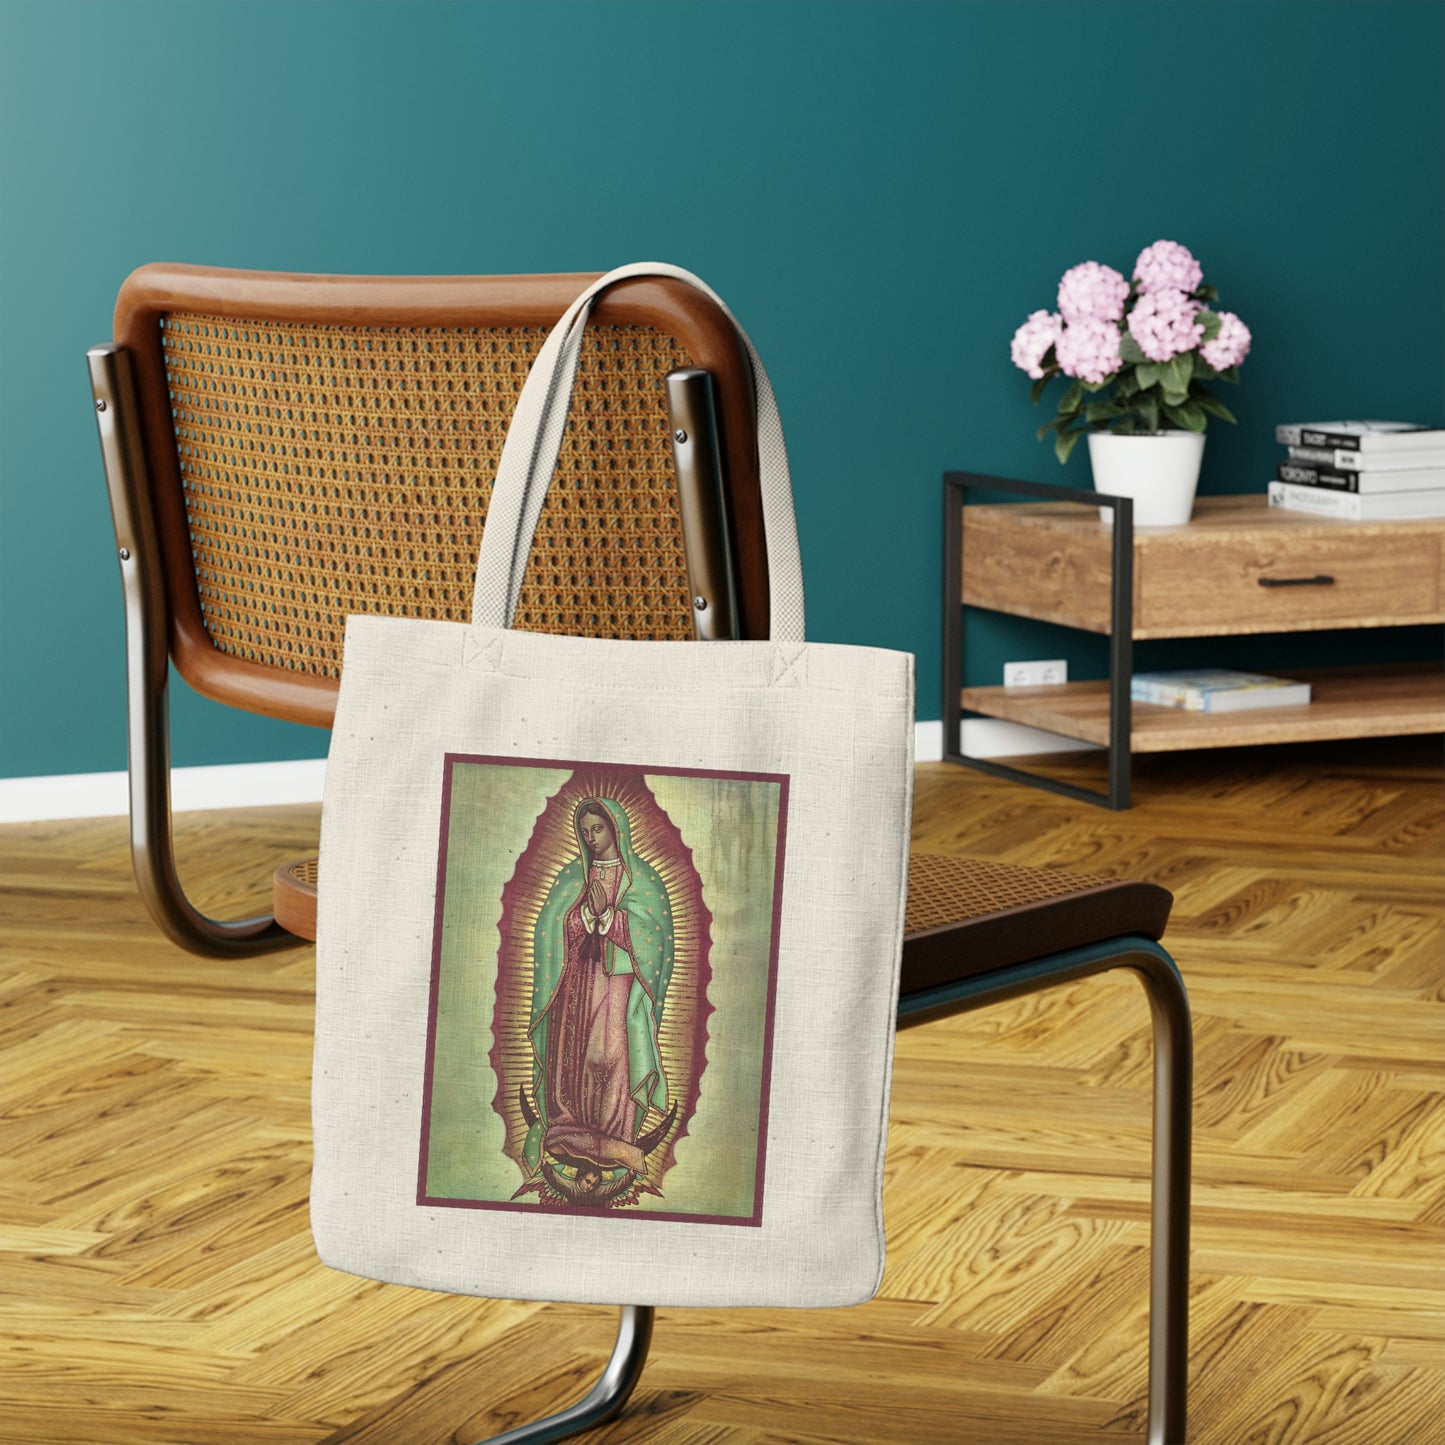 Our Lady of Guadalupe Polyester Tote Bag